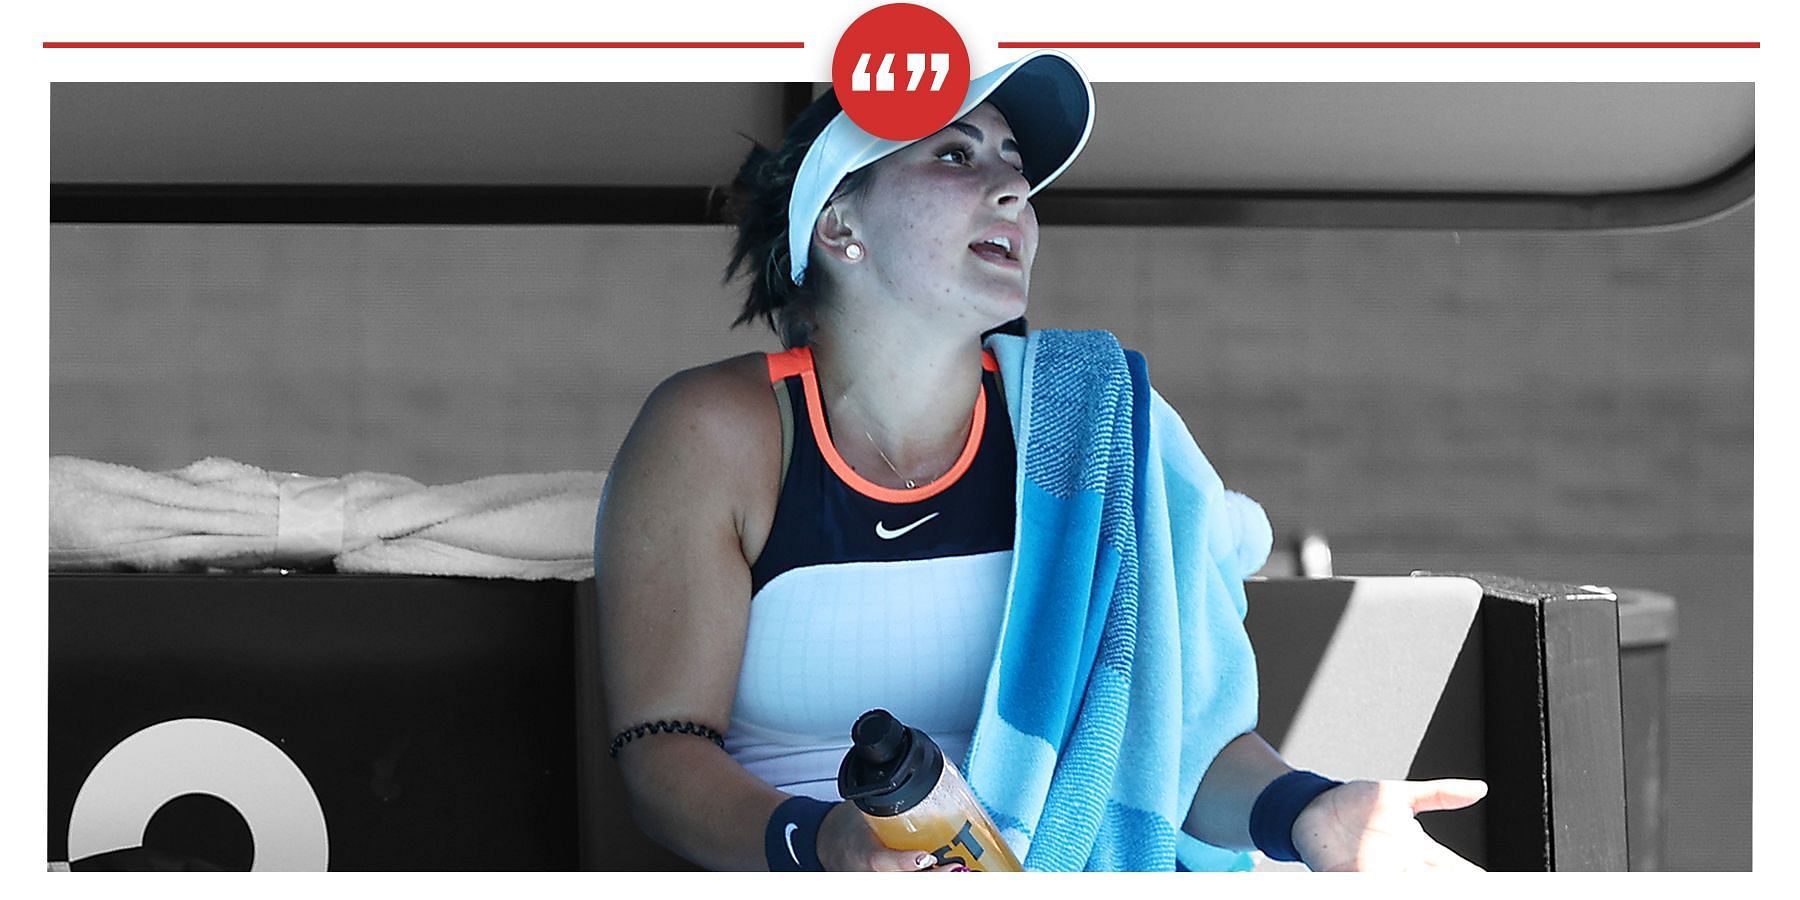 Andreescu took to Instagram to address allegations of faking health problems on court